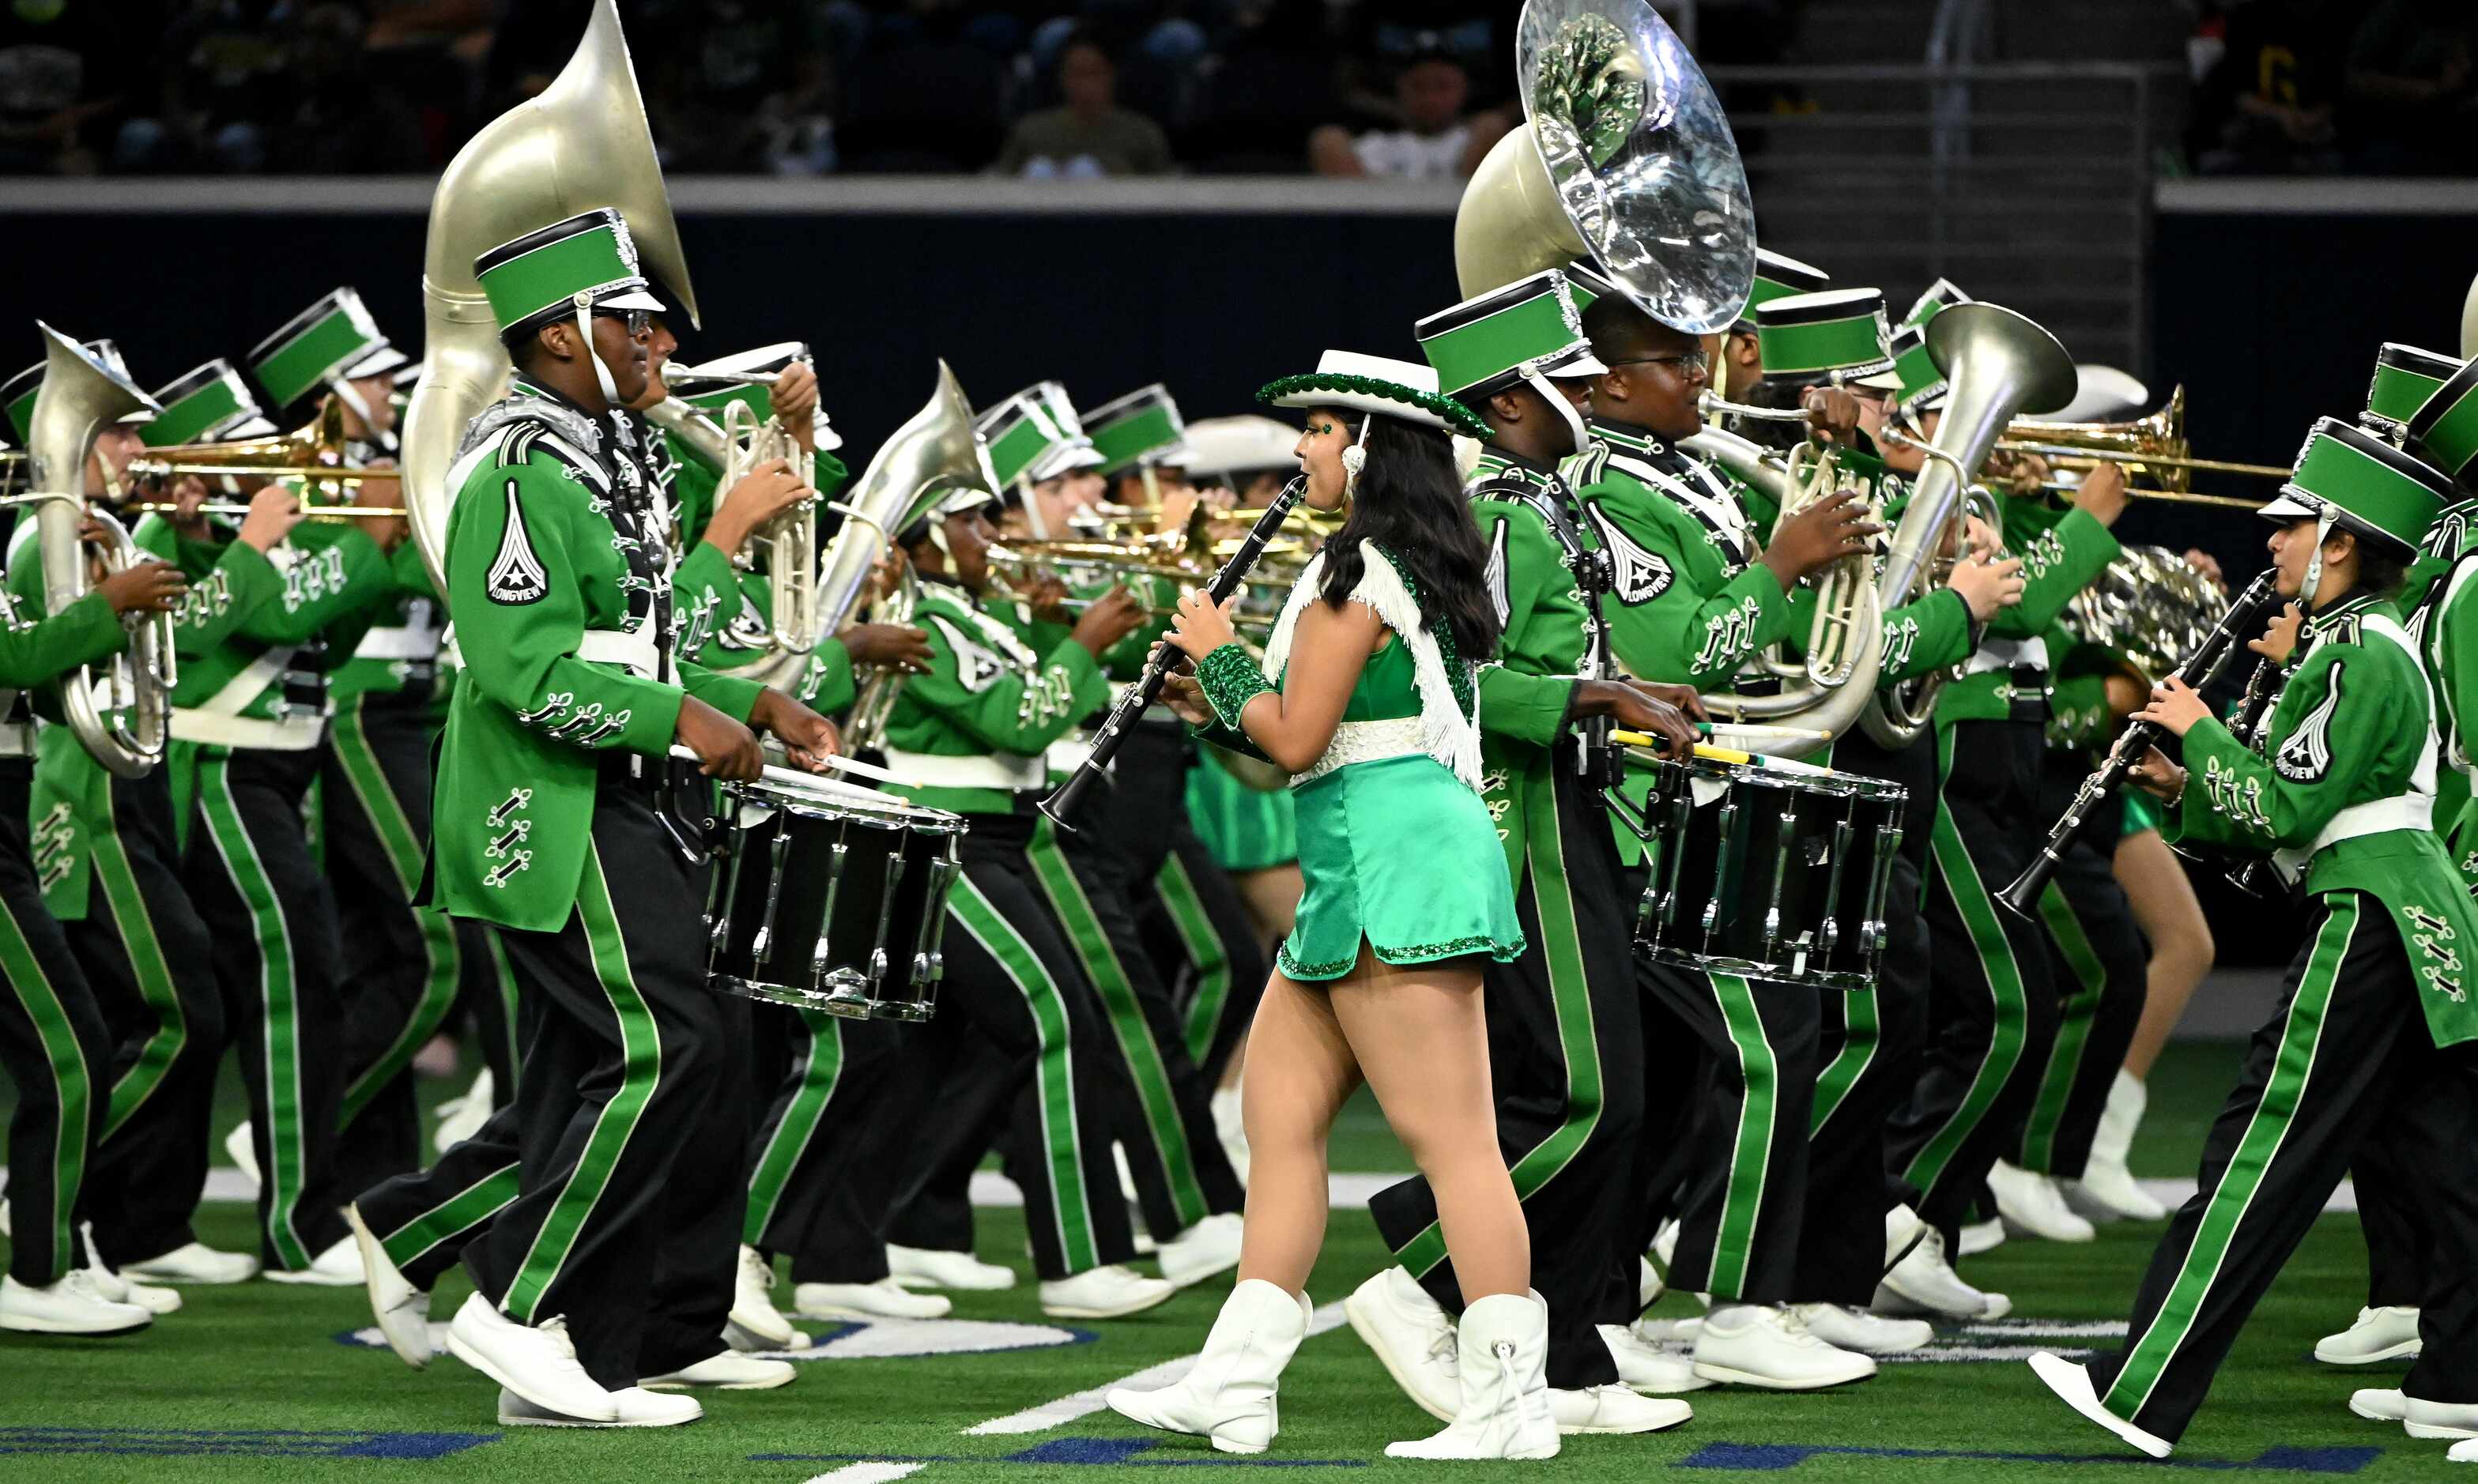 The Longview band performs during halftime of a high school football game between Longview...